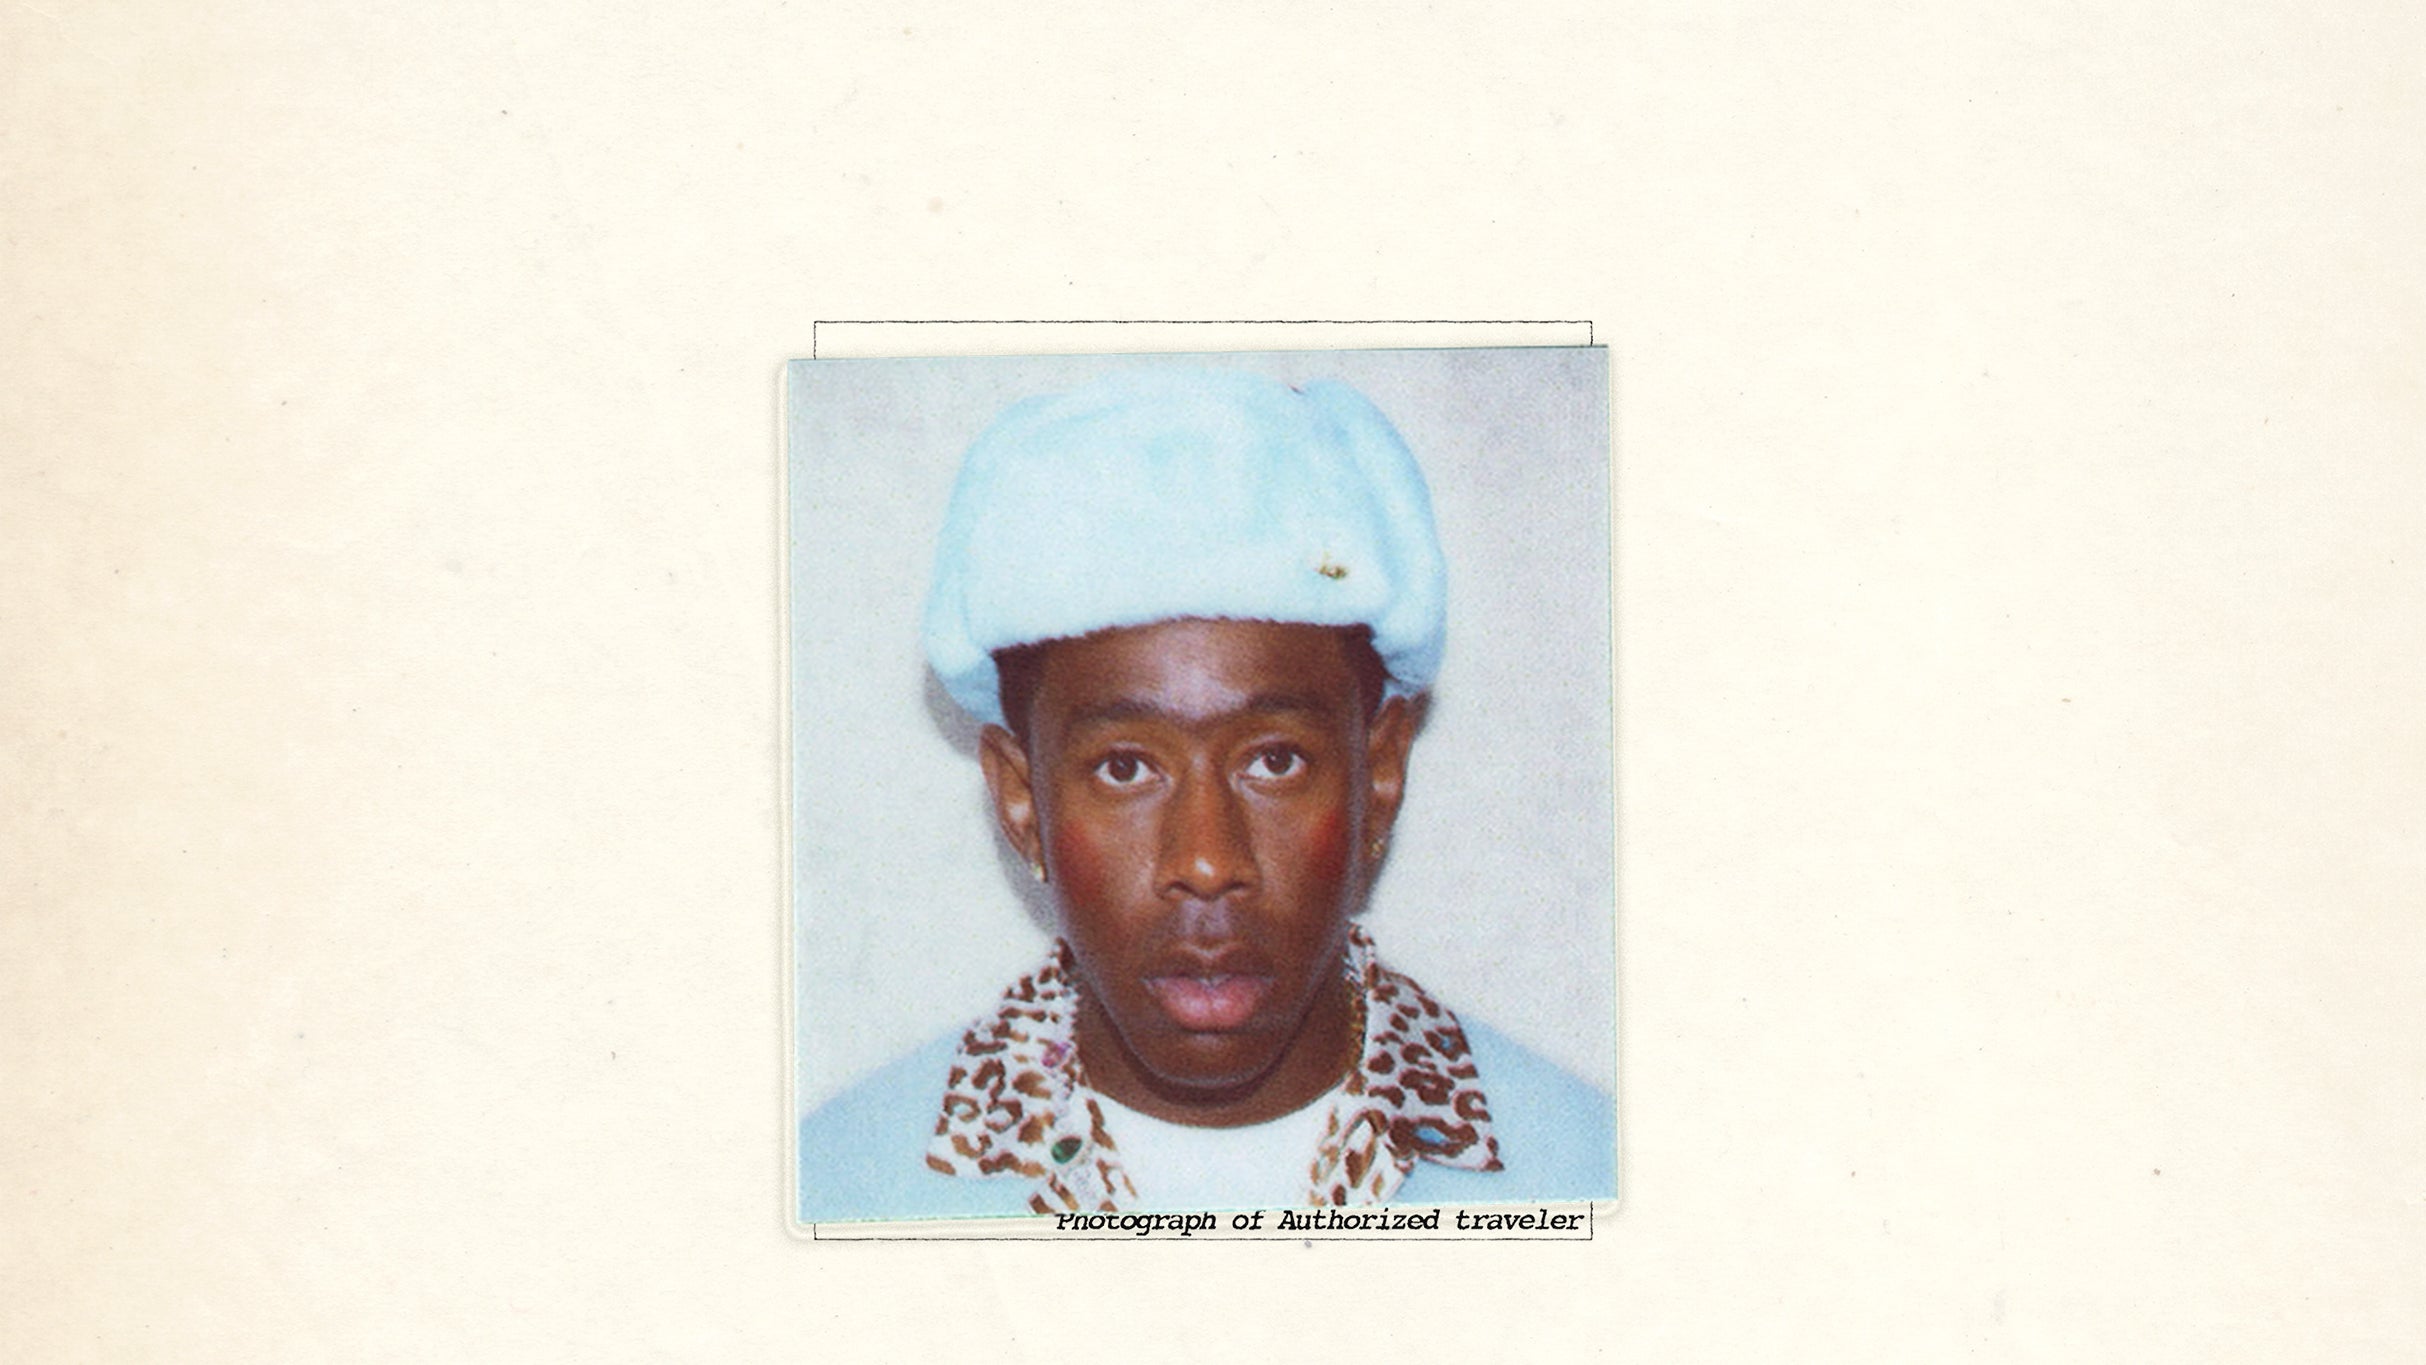 Tyler, the Creator in Madison promo photo for Exclusive presale offer code